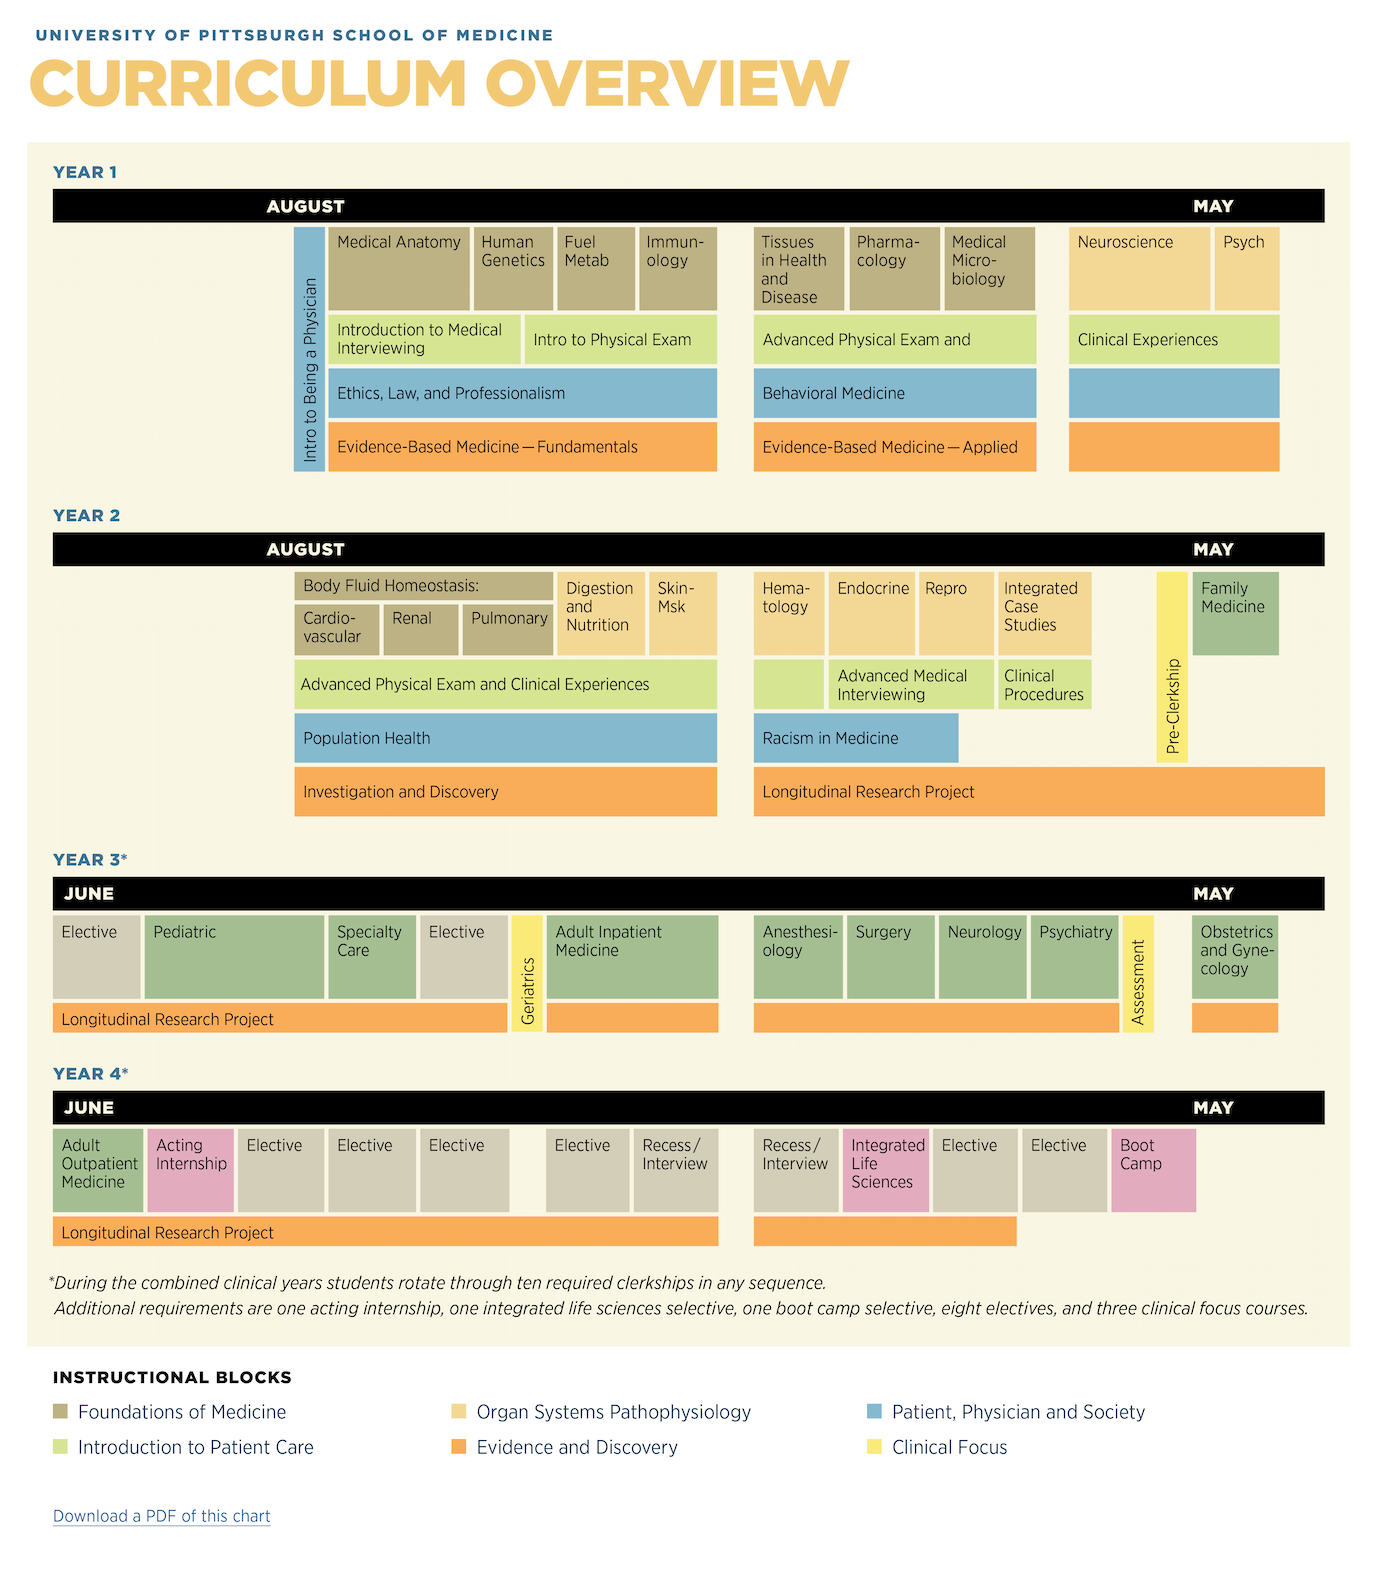 Curriculum Overview image